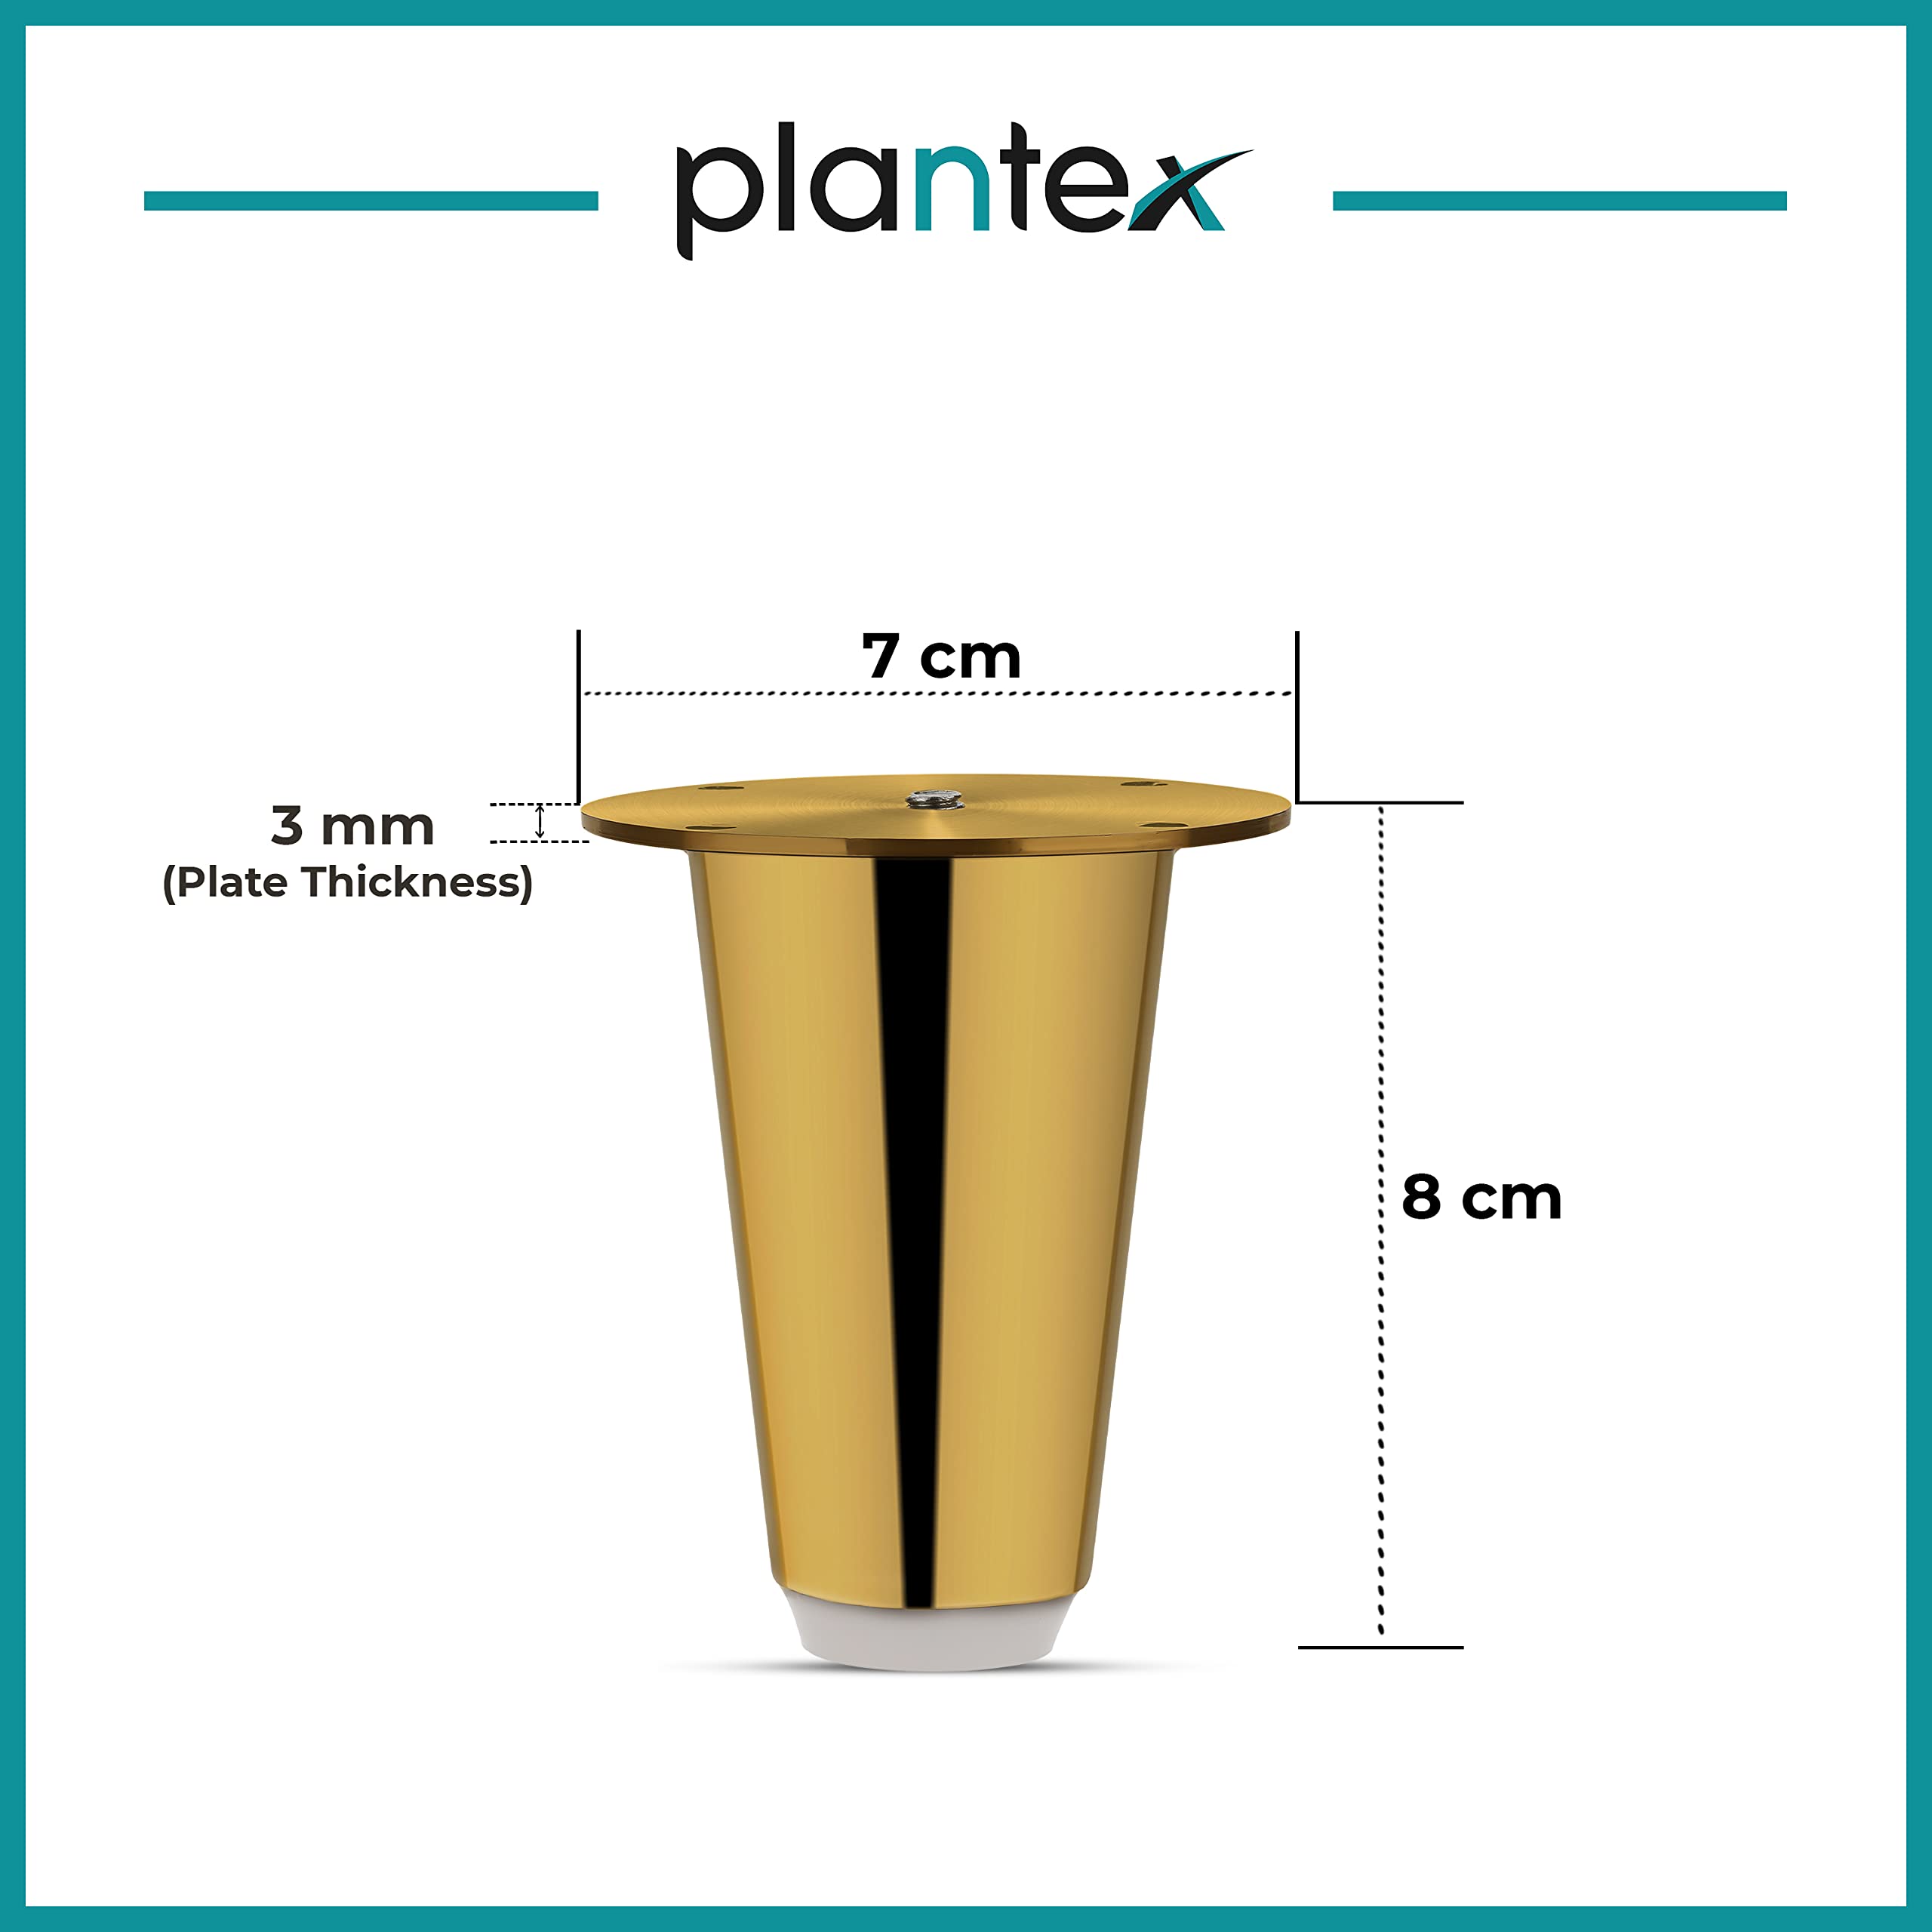 Plantex Heavy Duty Stainless Steel 3 inch Sofa Leg/Bed Furniture Leg Pair for Home Furnitures (DTS-53, Gold) – 10 Pcs